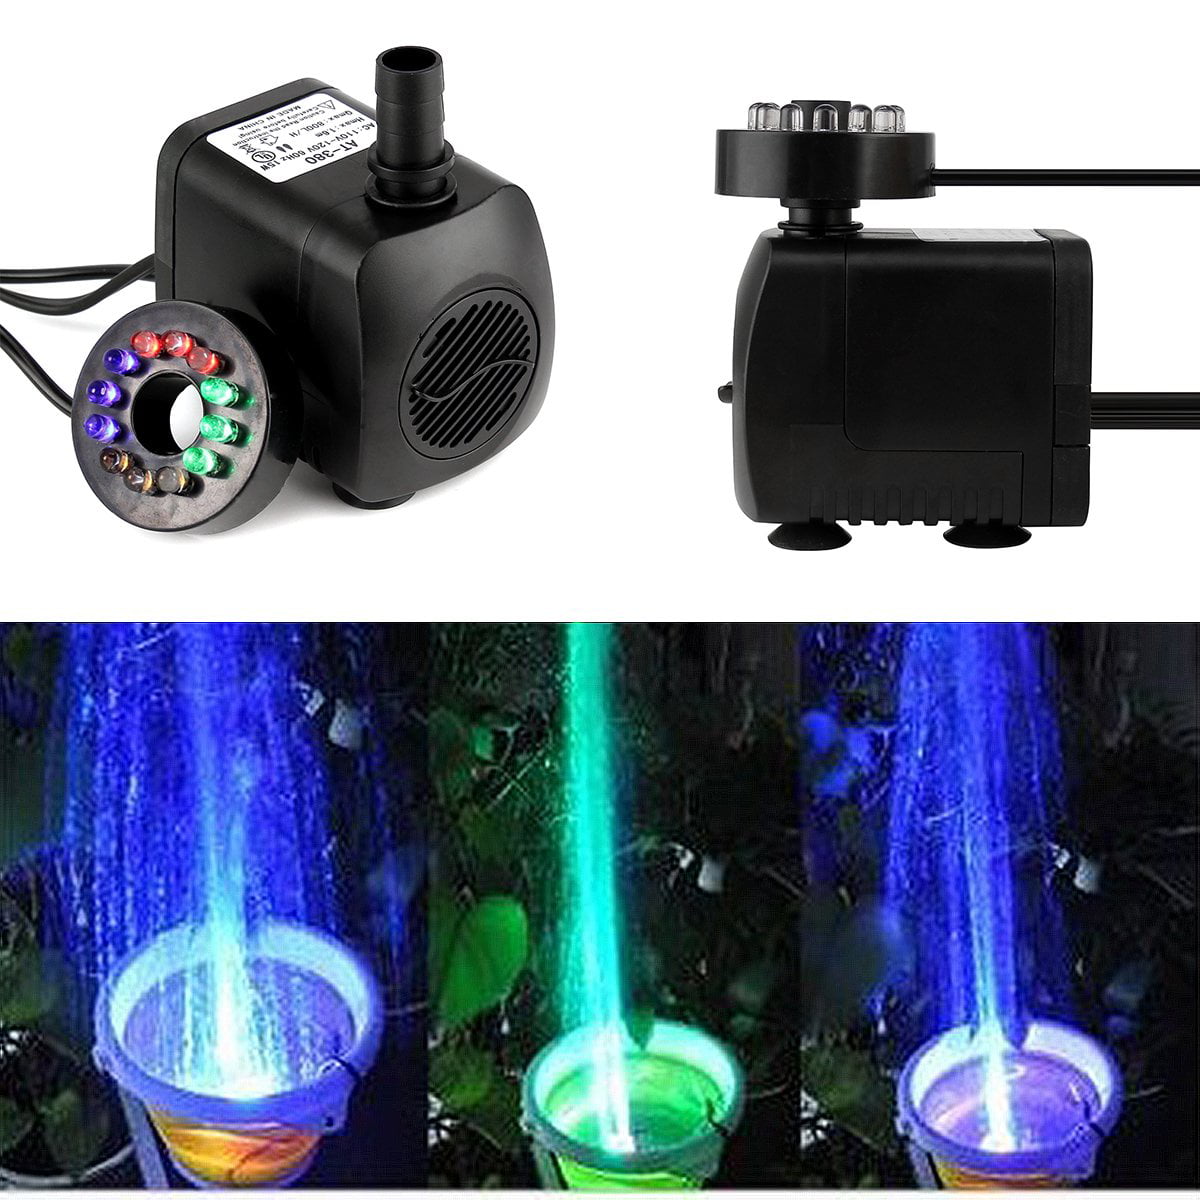 Submersible Water Pump with 12 Color LED Light Fountain Pool hydroponic Pond 